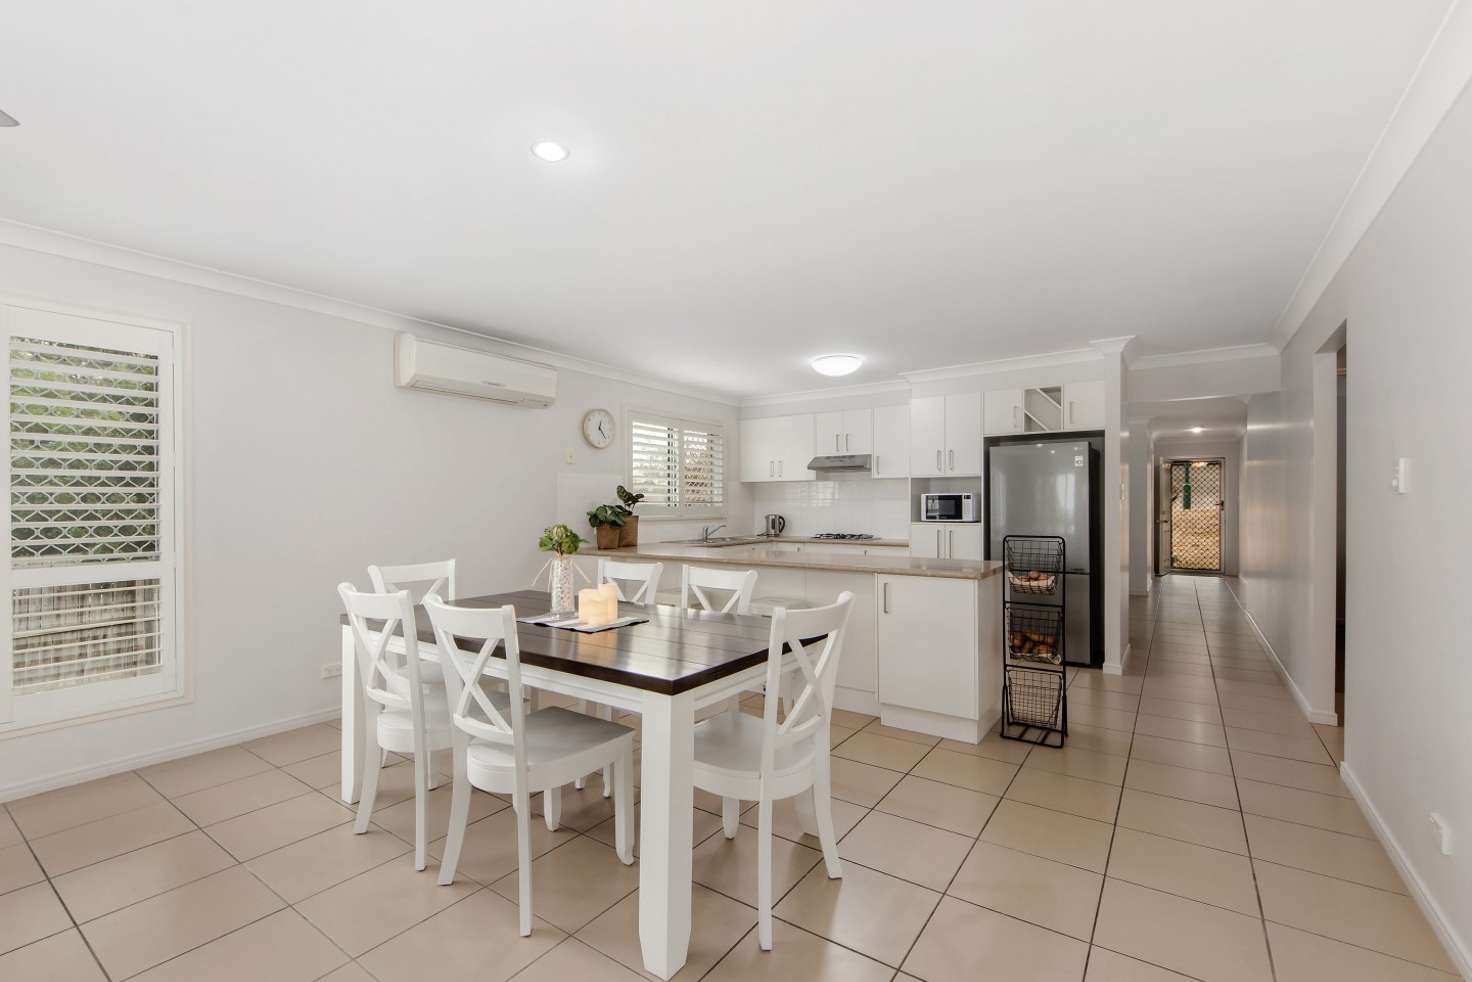 Main view of Homely house listing, 8 Serenity Street, Brassall QLD 4305